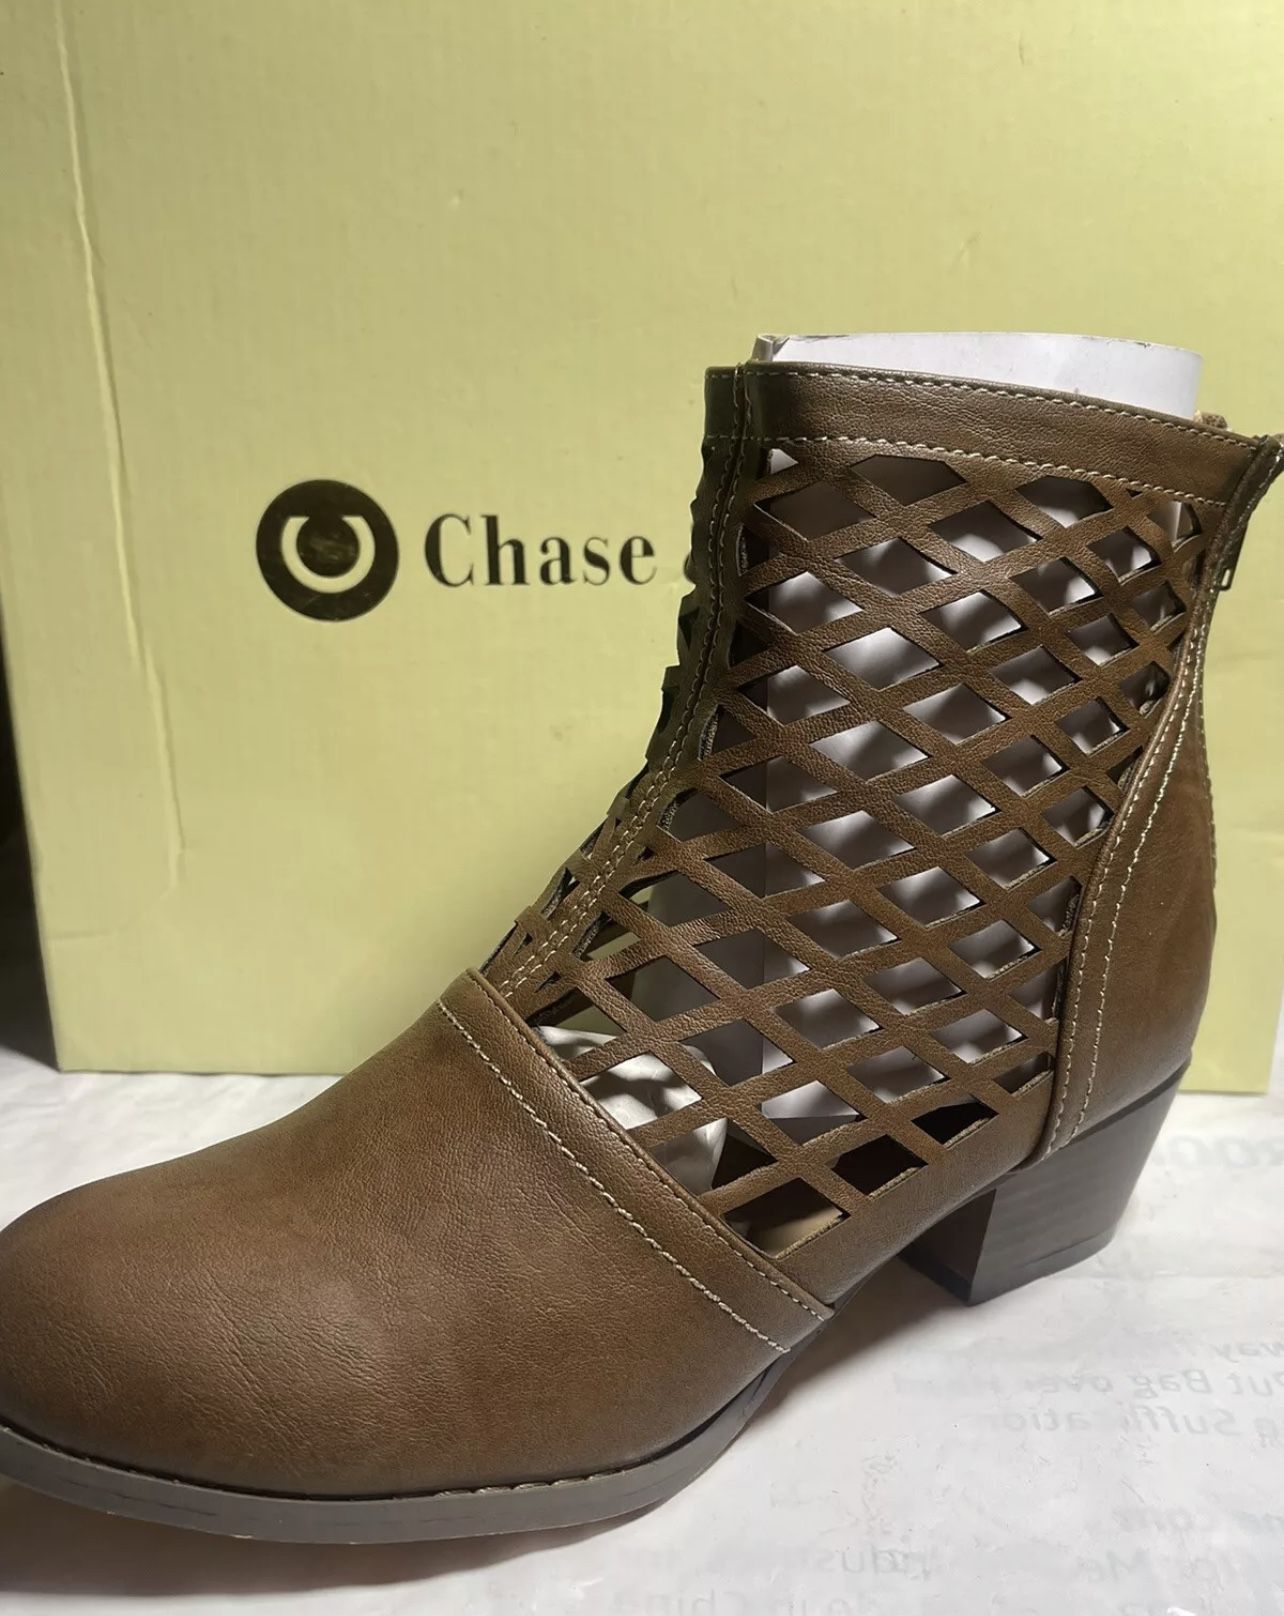 New Women Boots Size 7